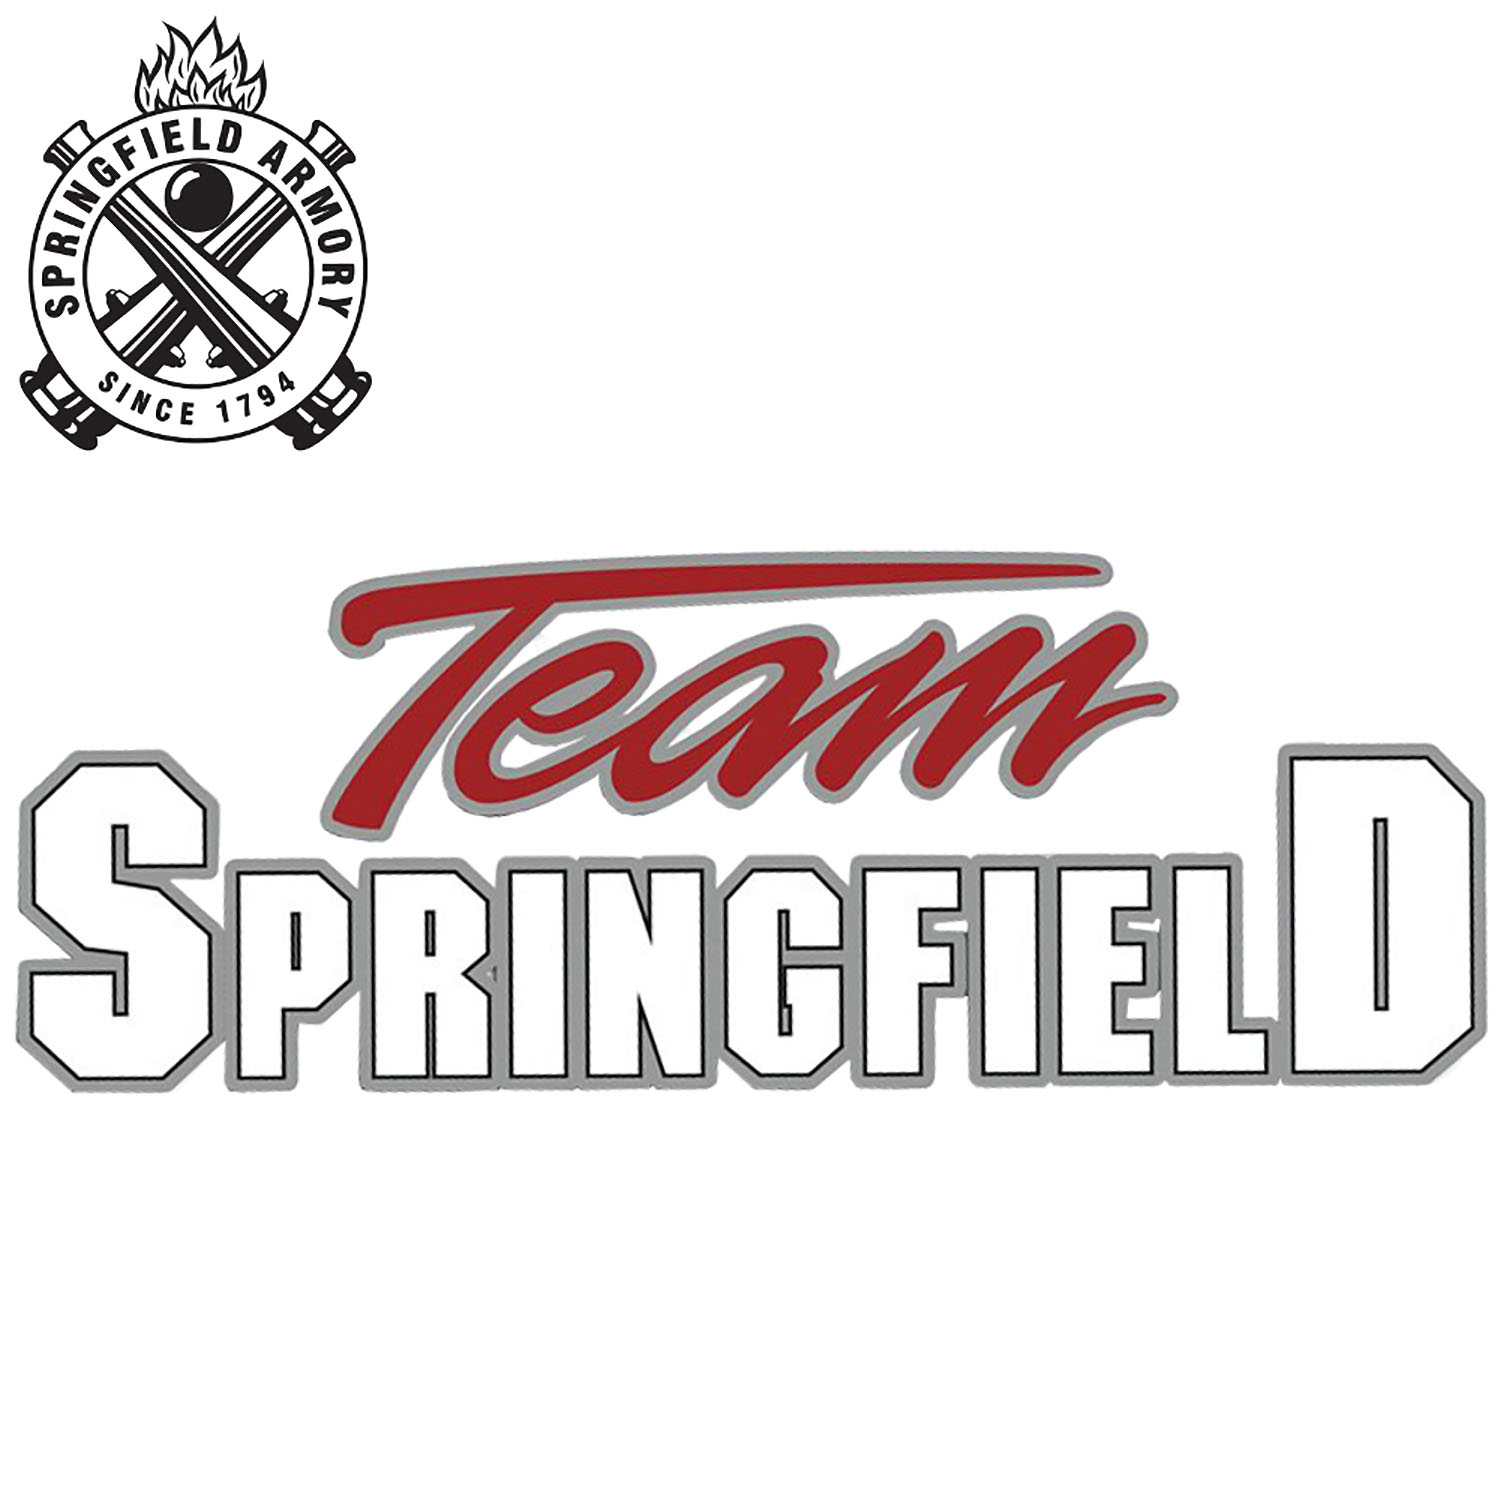 Springfield Armory Team Springfield Gold Hat Lapel Pin New in Packaging 